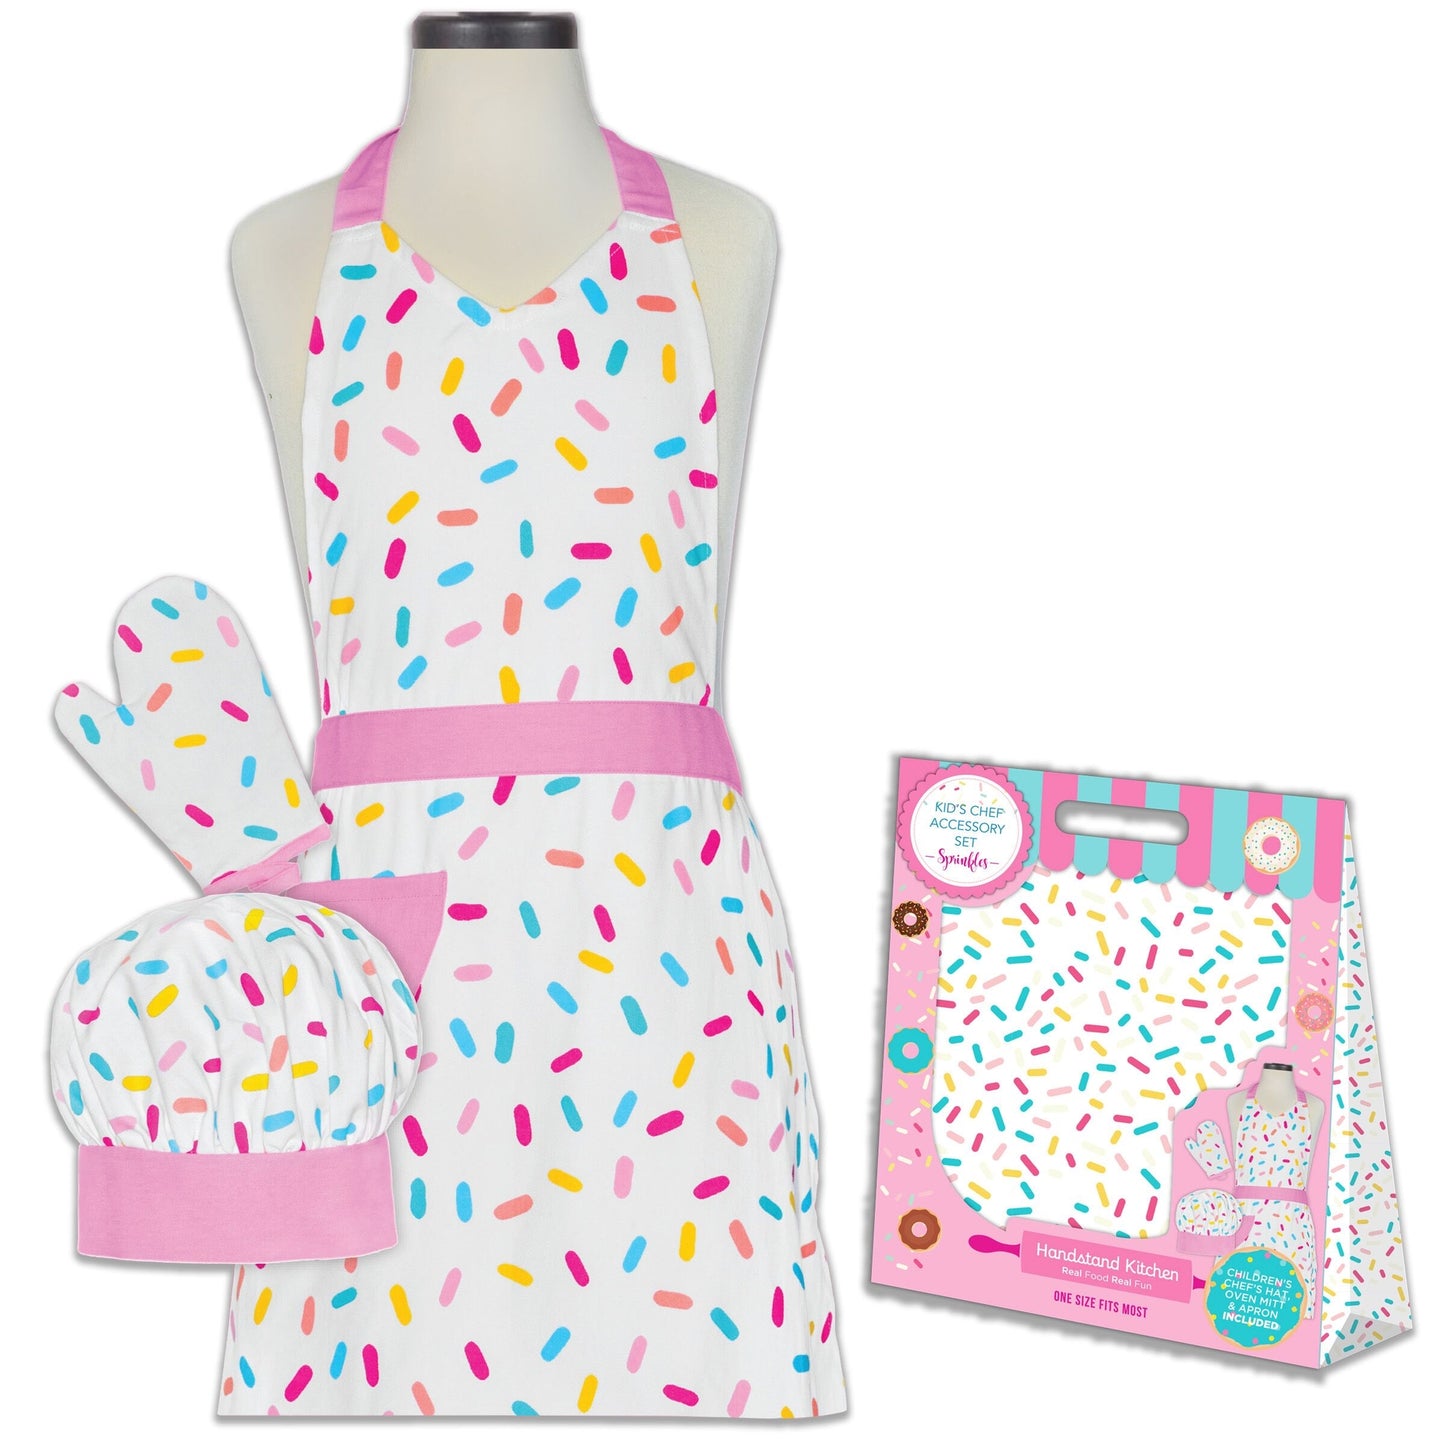 Sprinkles Deluxe Child Apron Set